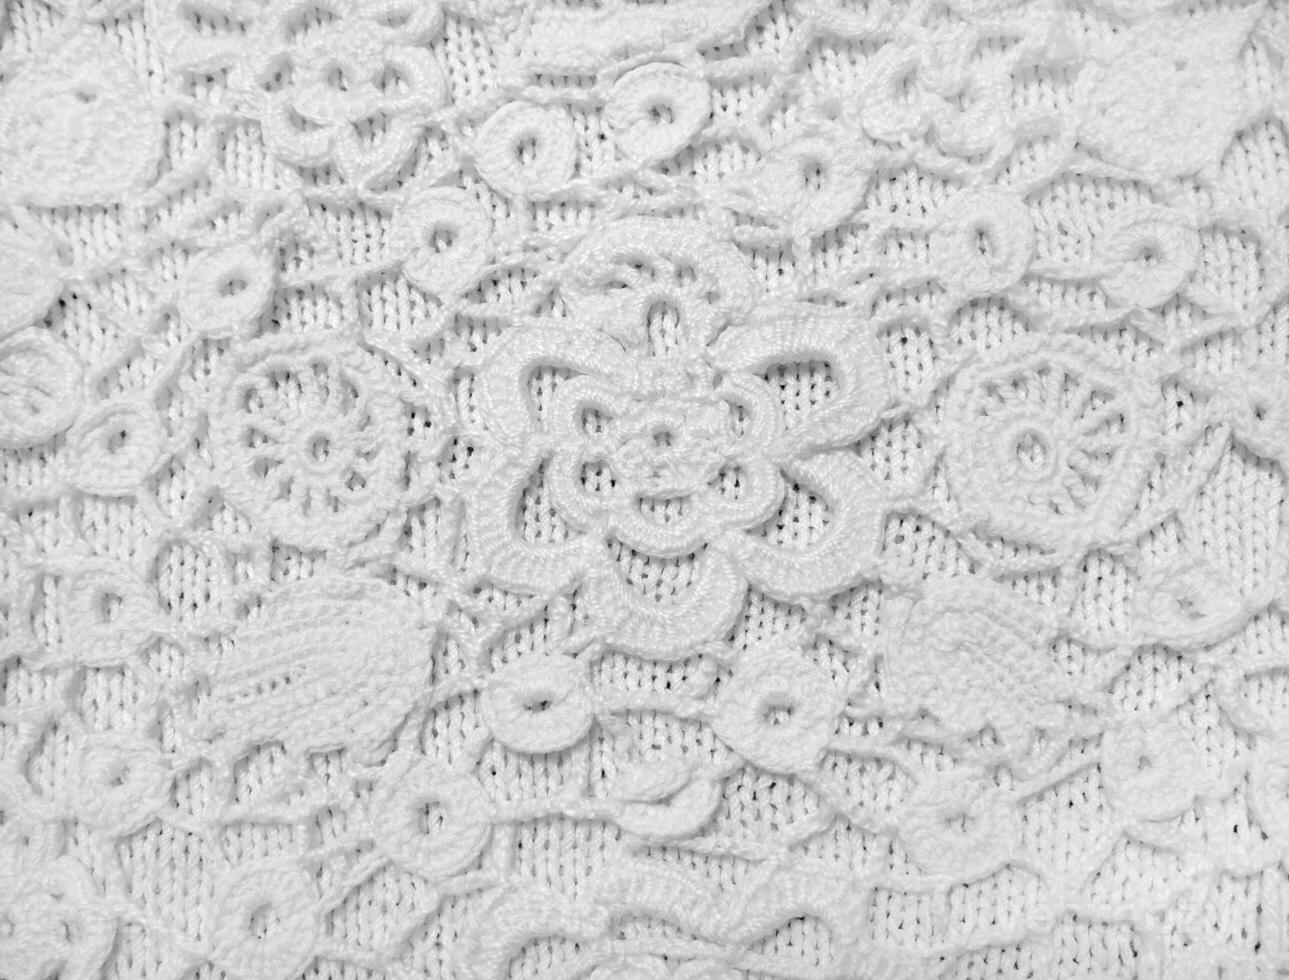 Crocheting from threads. Handmade Irish lace. Knitwear close-up. Selected sharpness photo